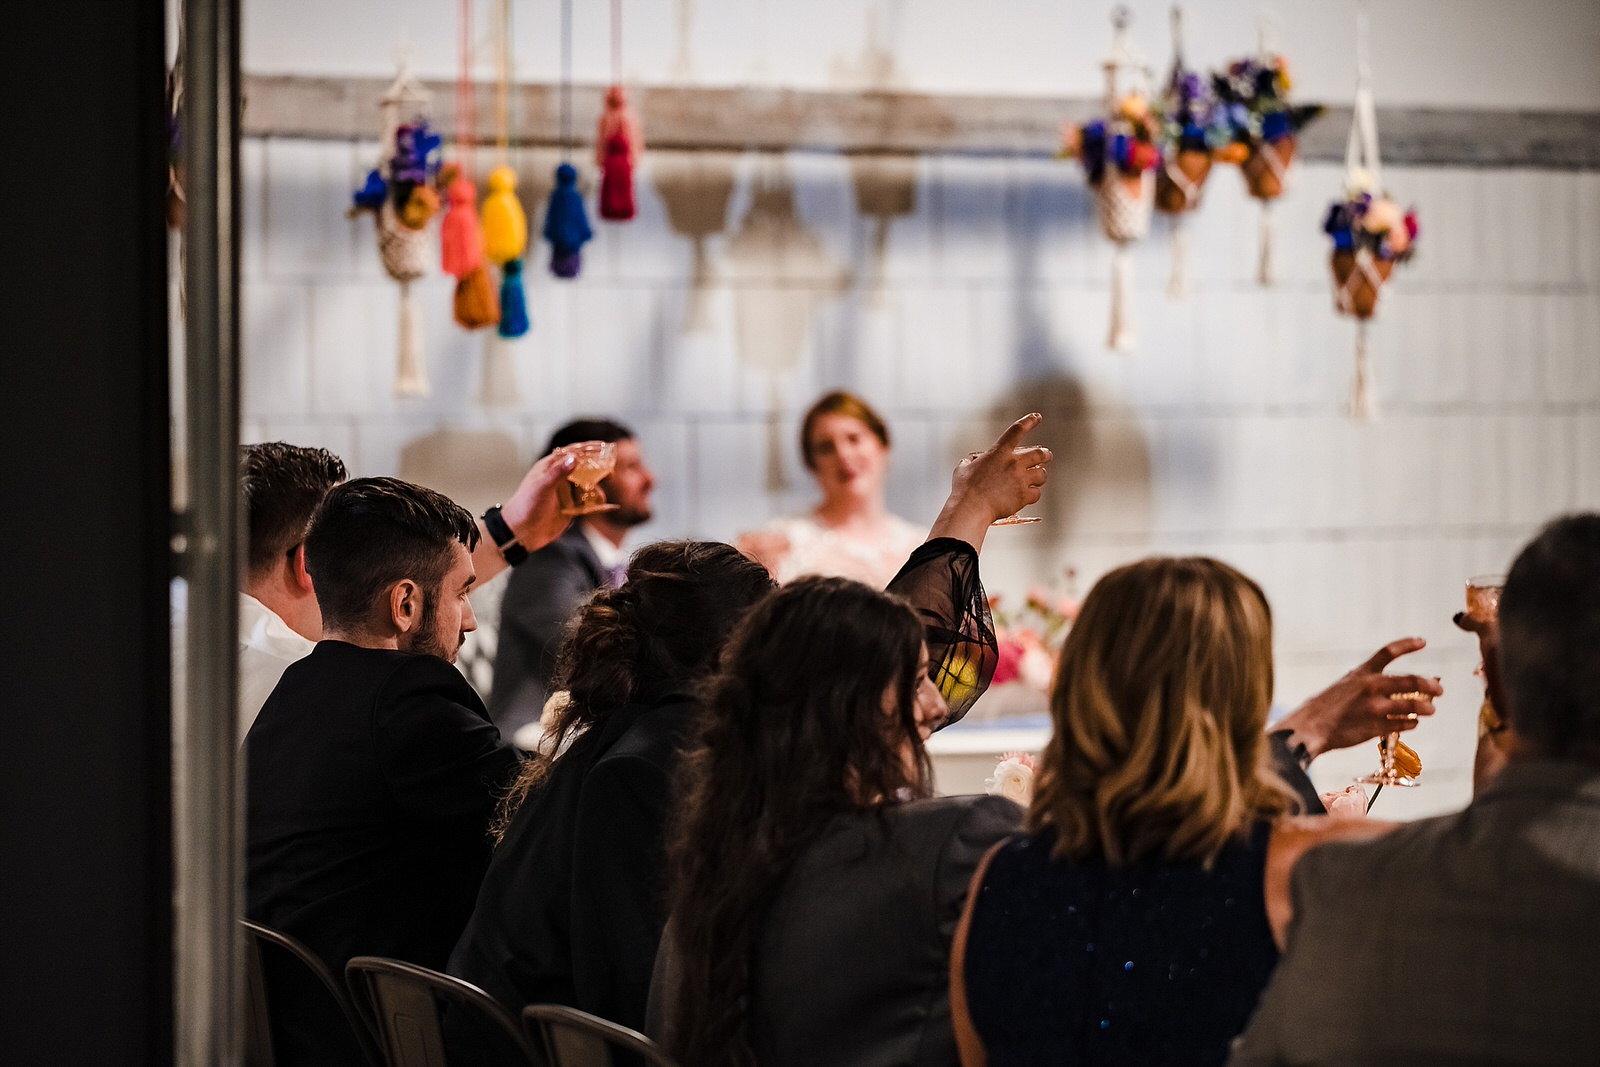 Guests raise their glasses for a toast at this colorful wedding reception